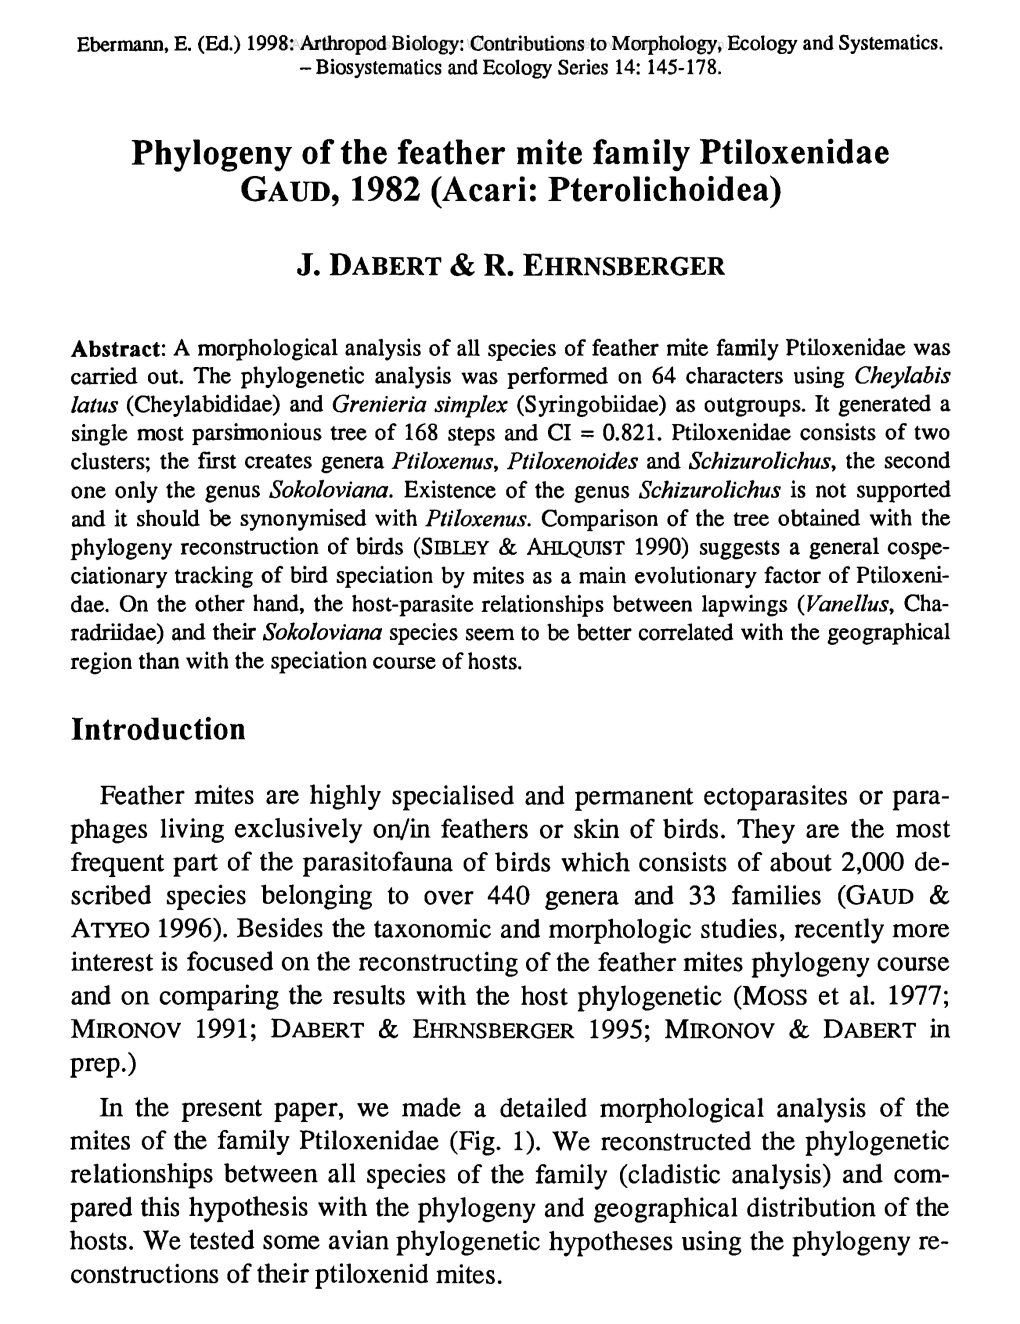 Phylogeny of the Feather Mite Family Ptiloxenidae GAUD, 1982